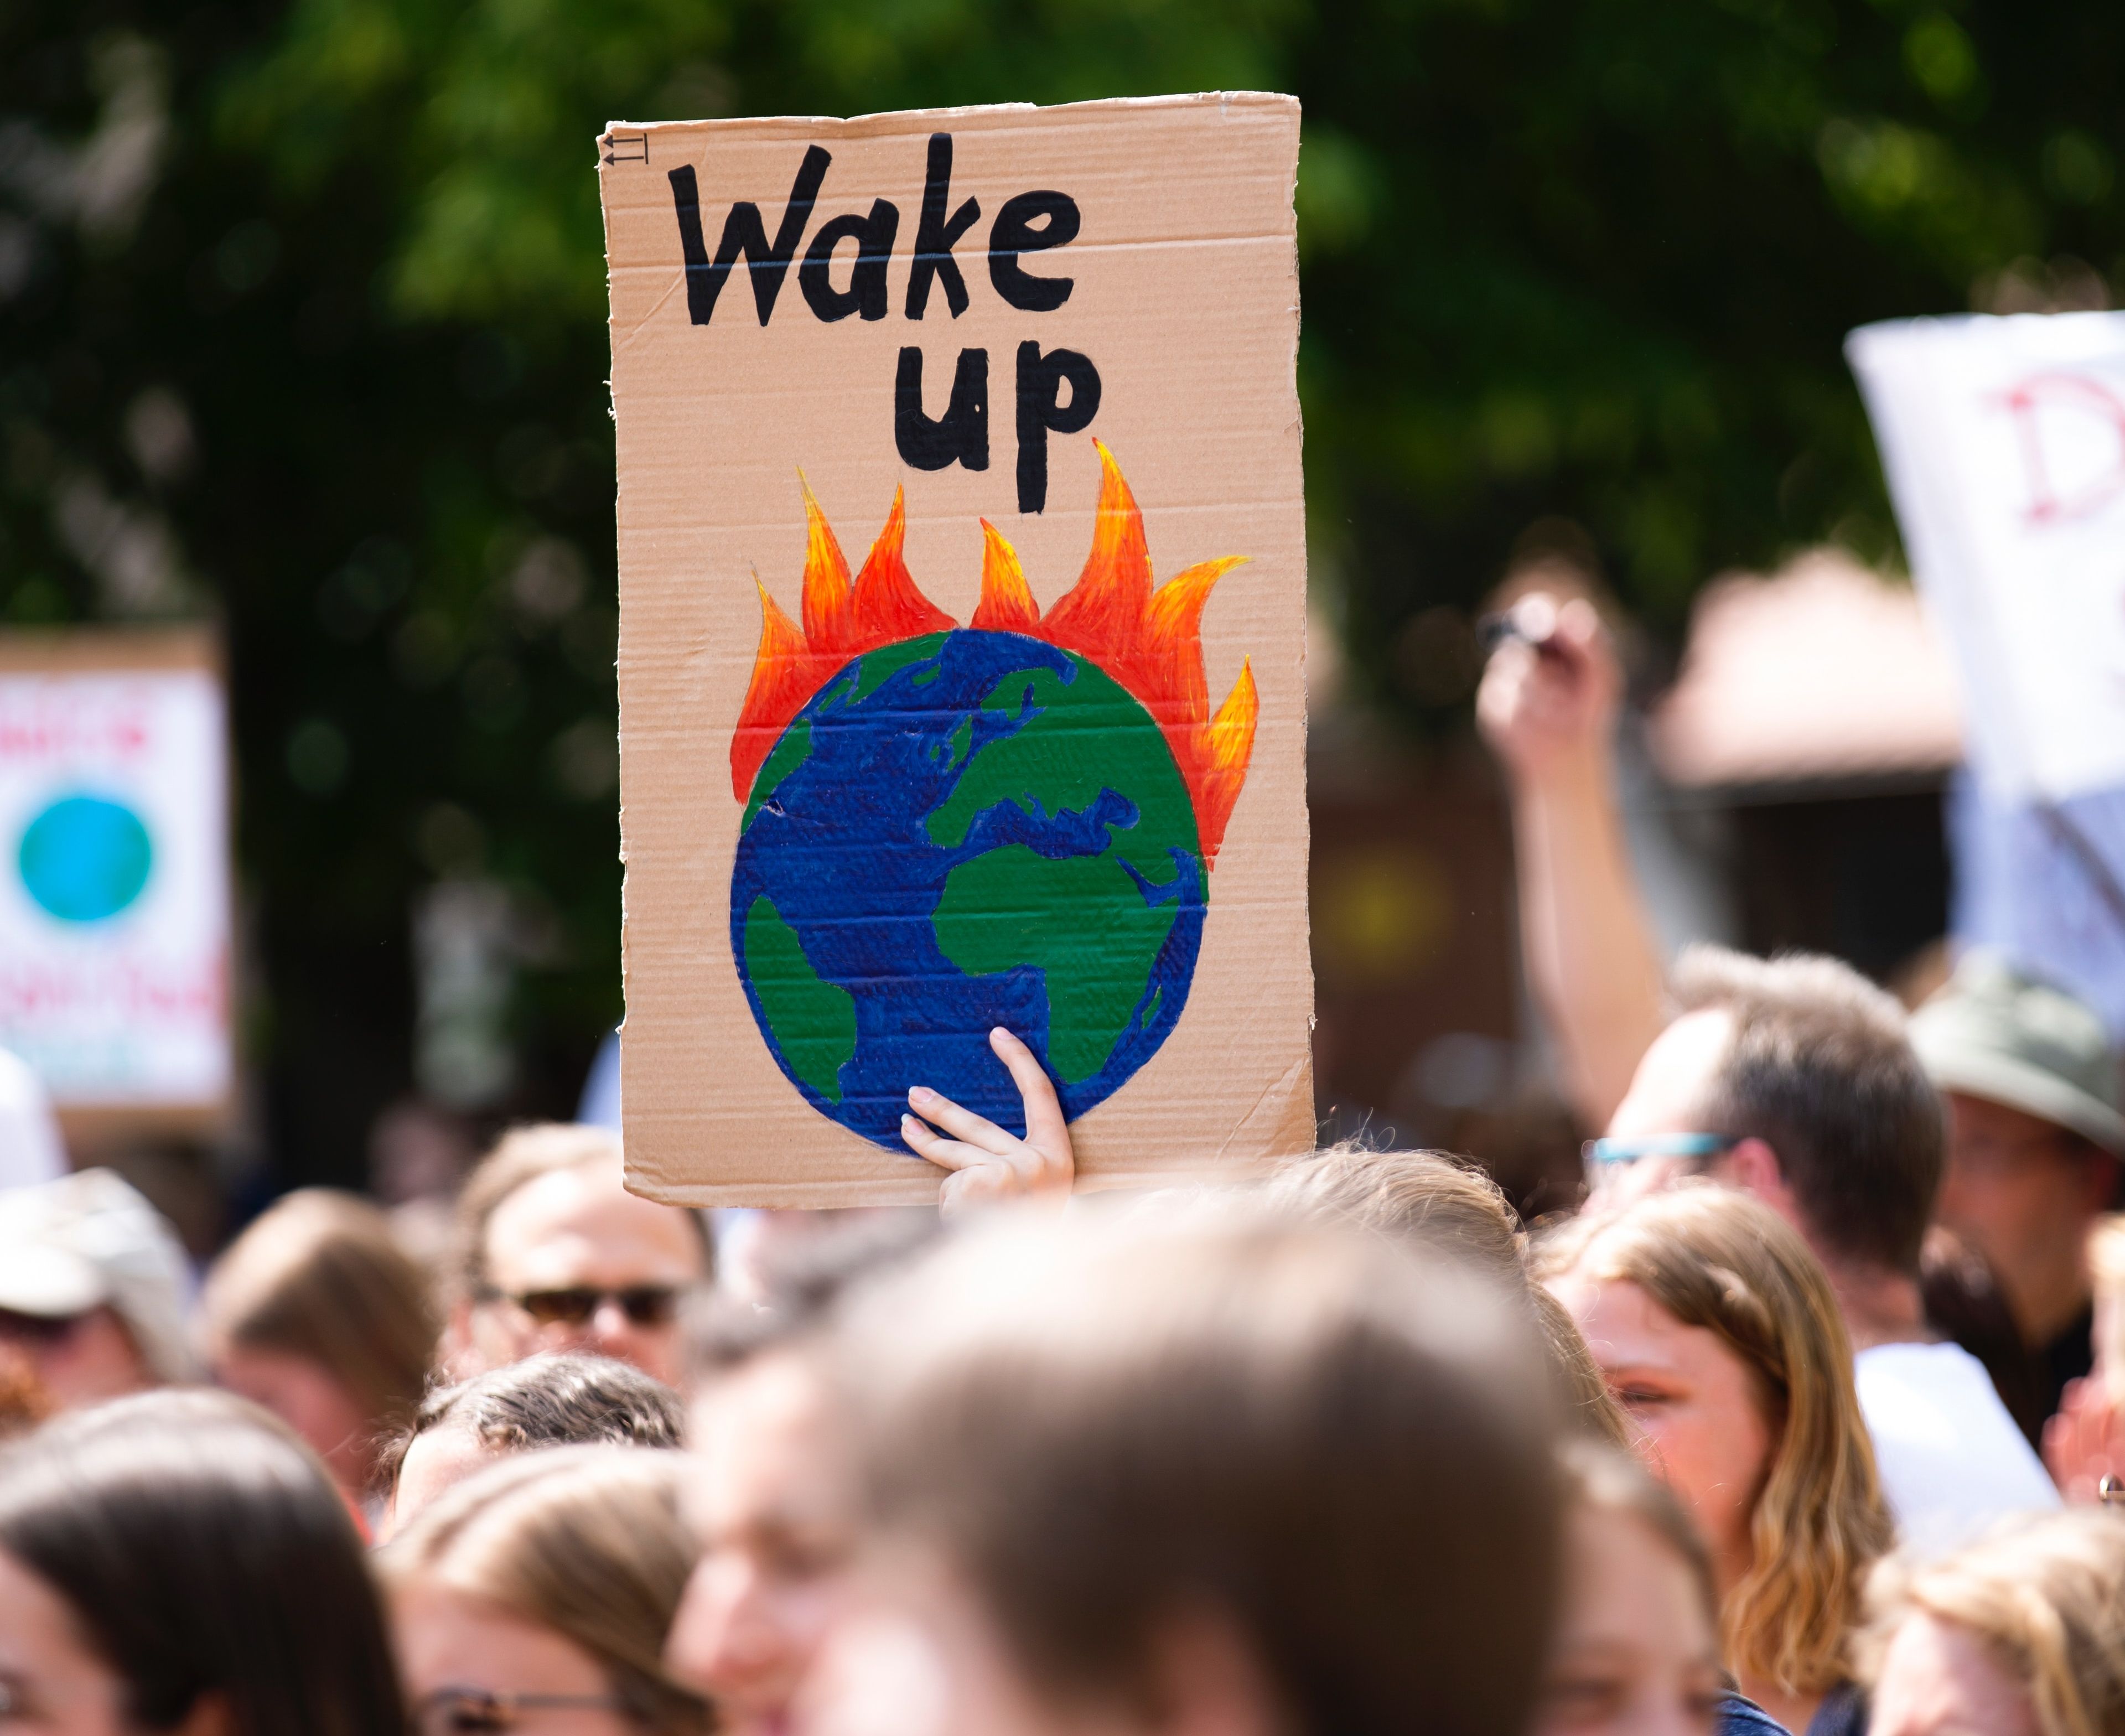 A sign that reads "Wake Up" above a picture of planet Earth on fire, being held up at a protest.